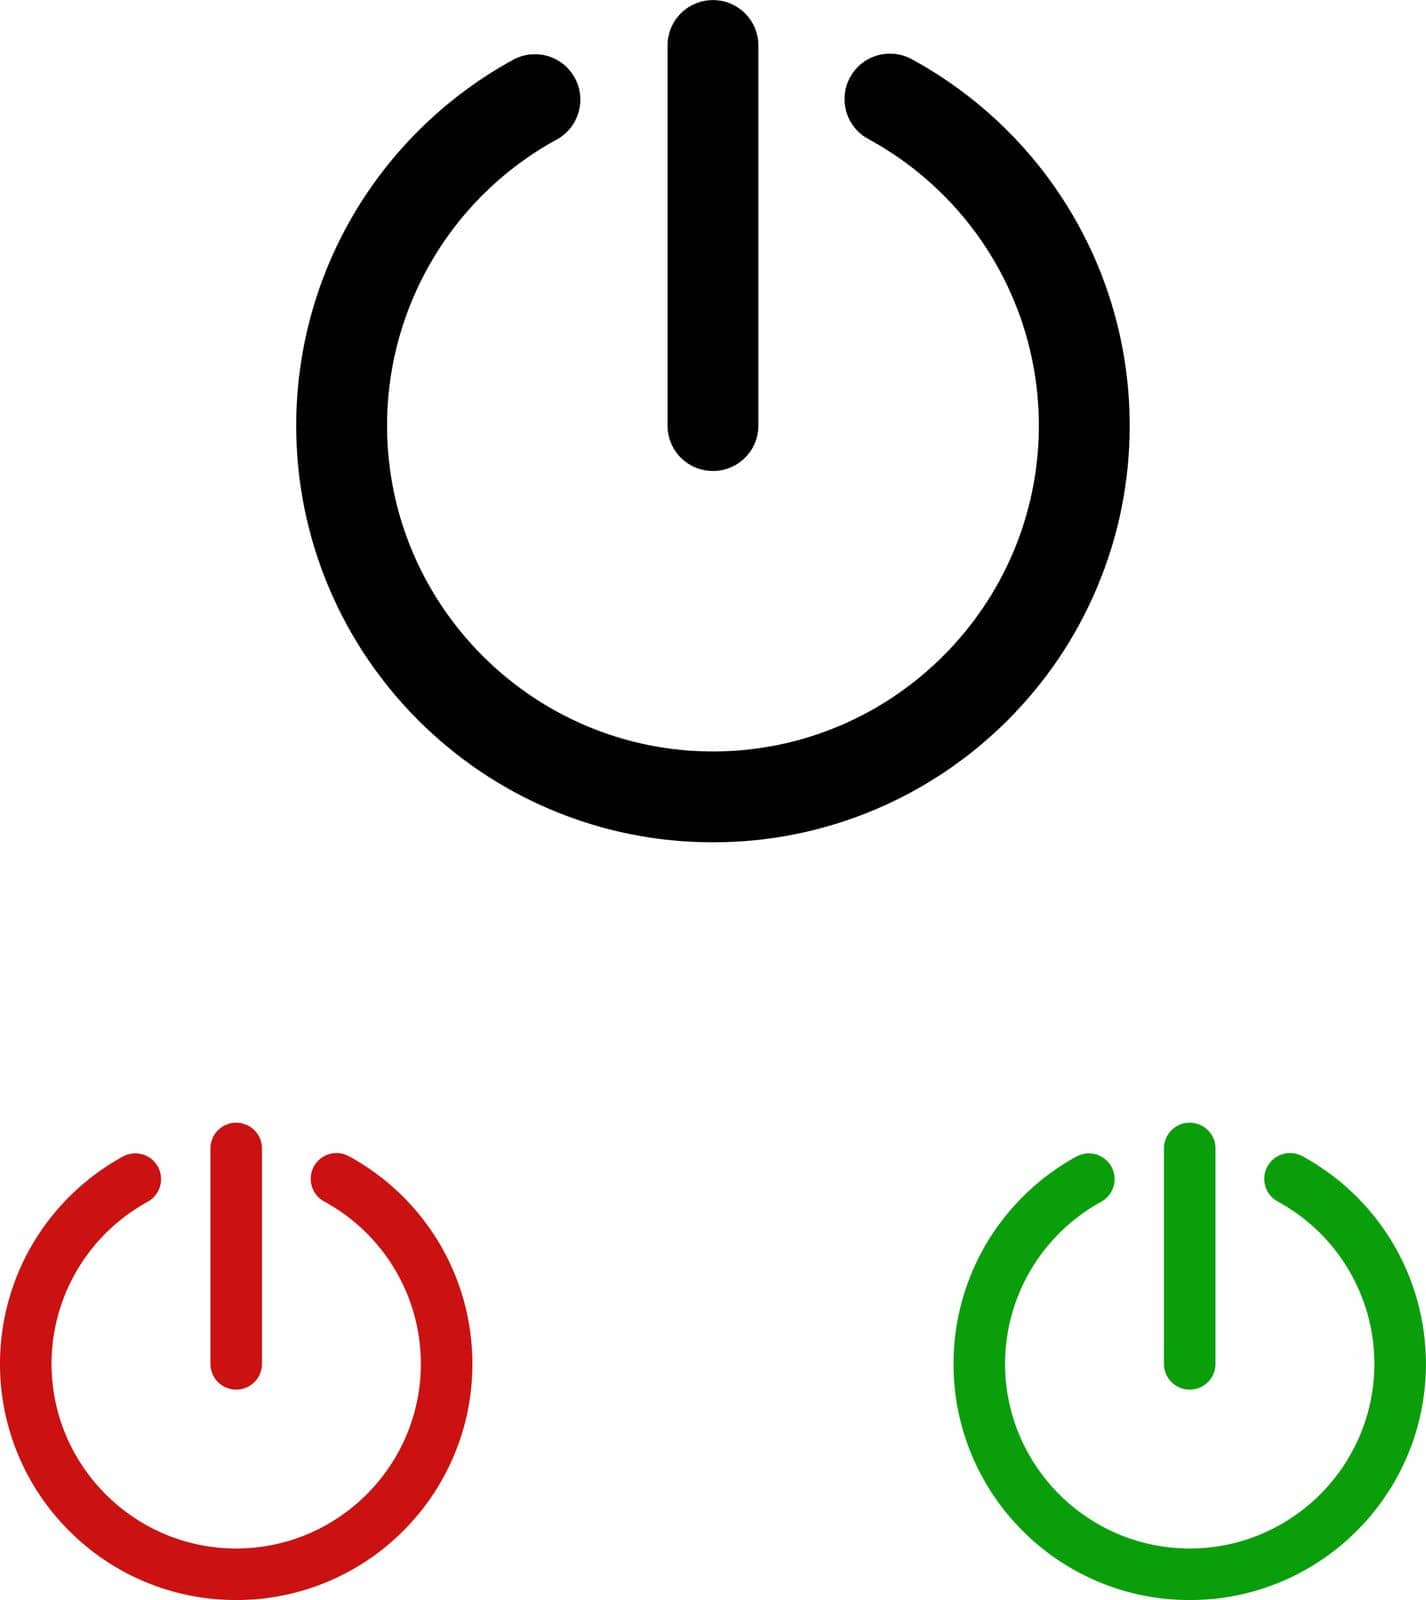 On and off sign, vector. On and off signs in black, red and green on a white background.